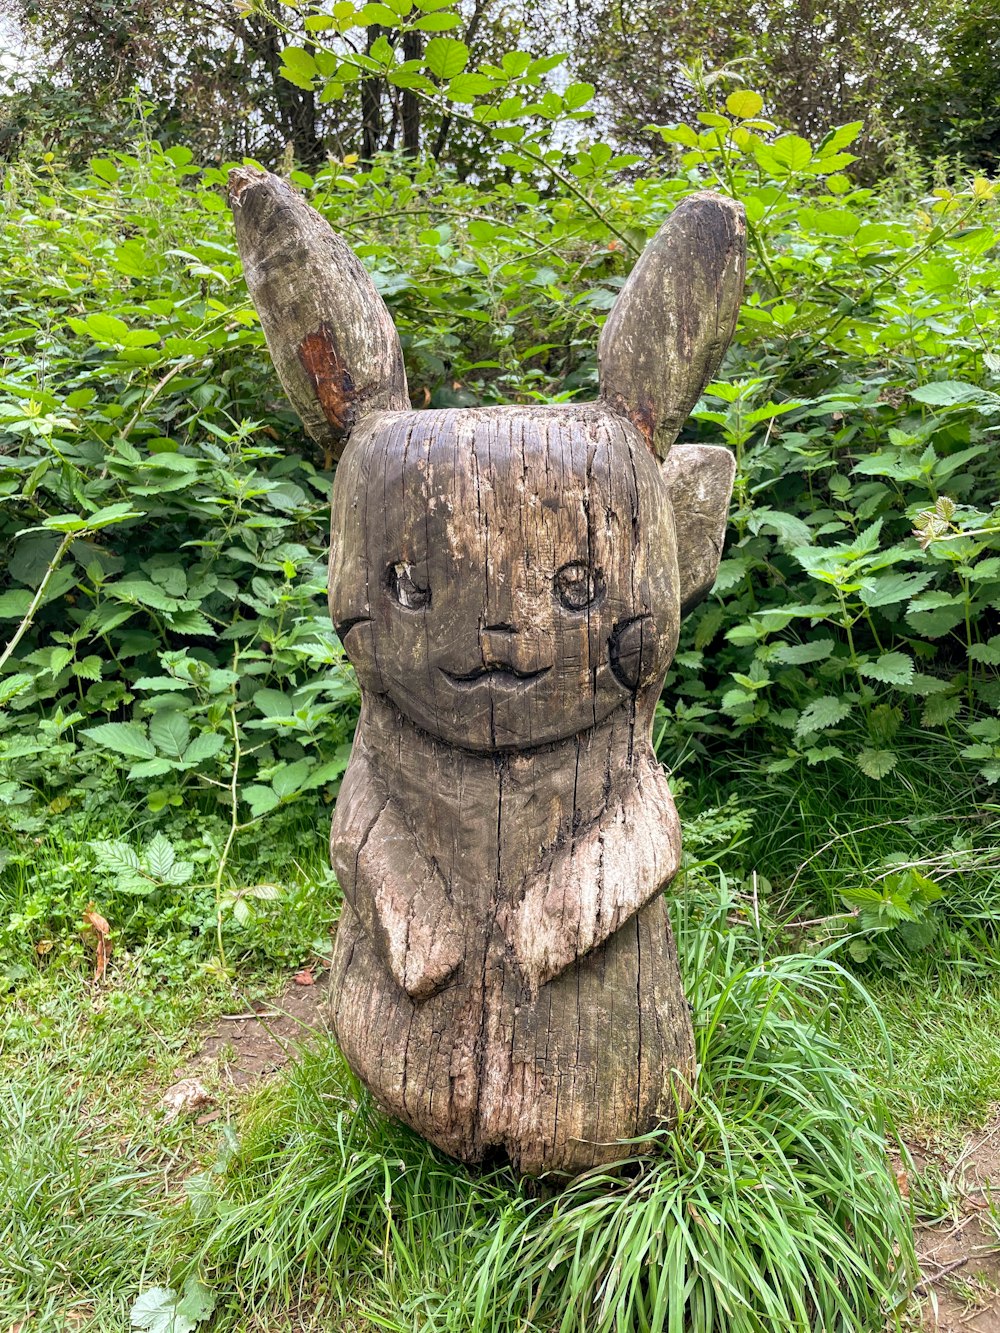 a wooden statue of a rabbit sitting in the grass